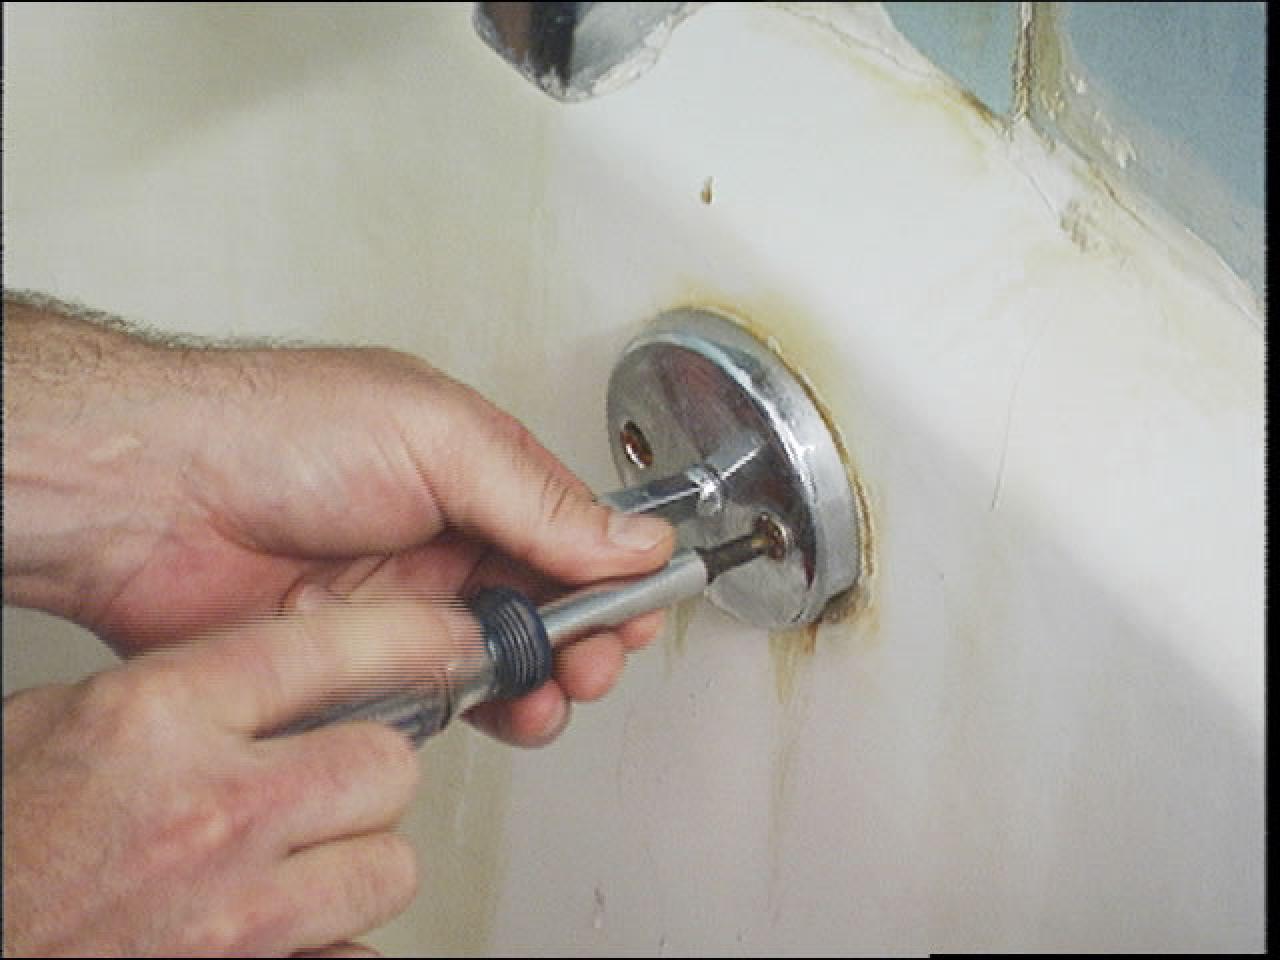 Drain Stoppers, How To Remove The Drain Cap From A Bathtub